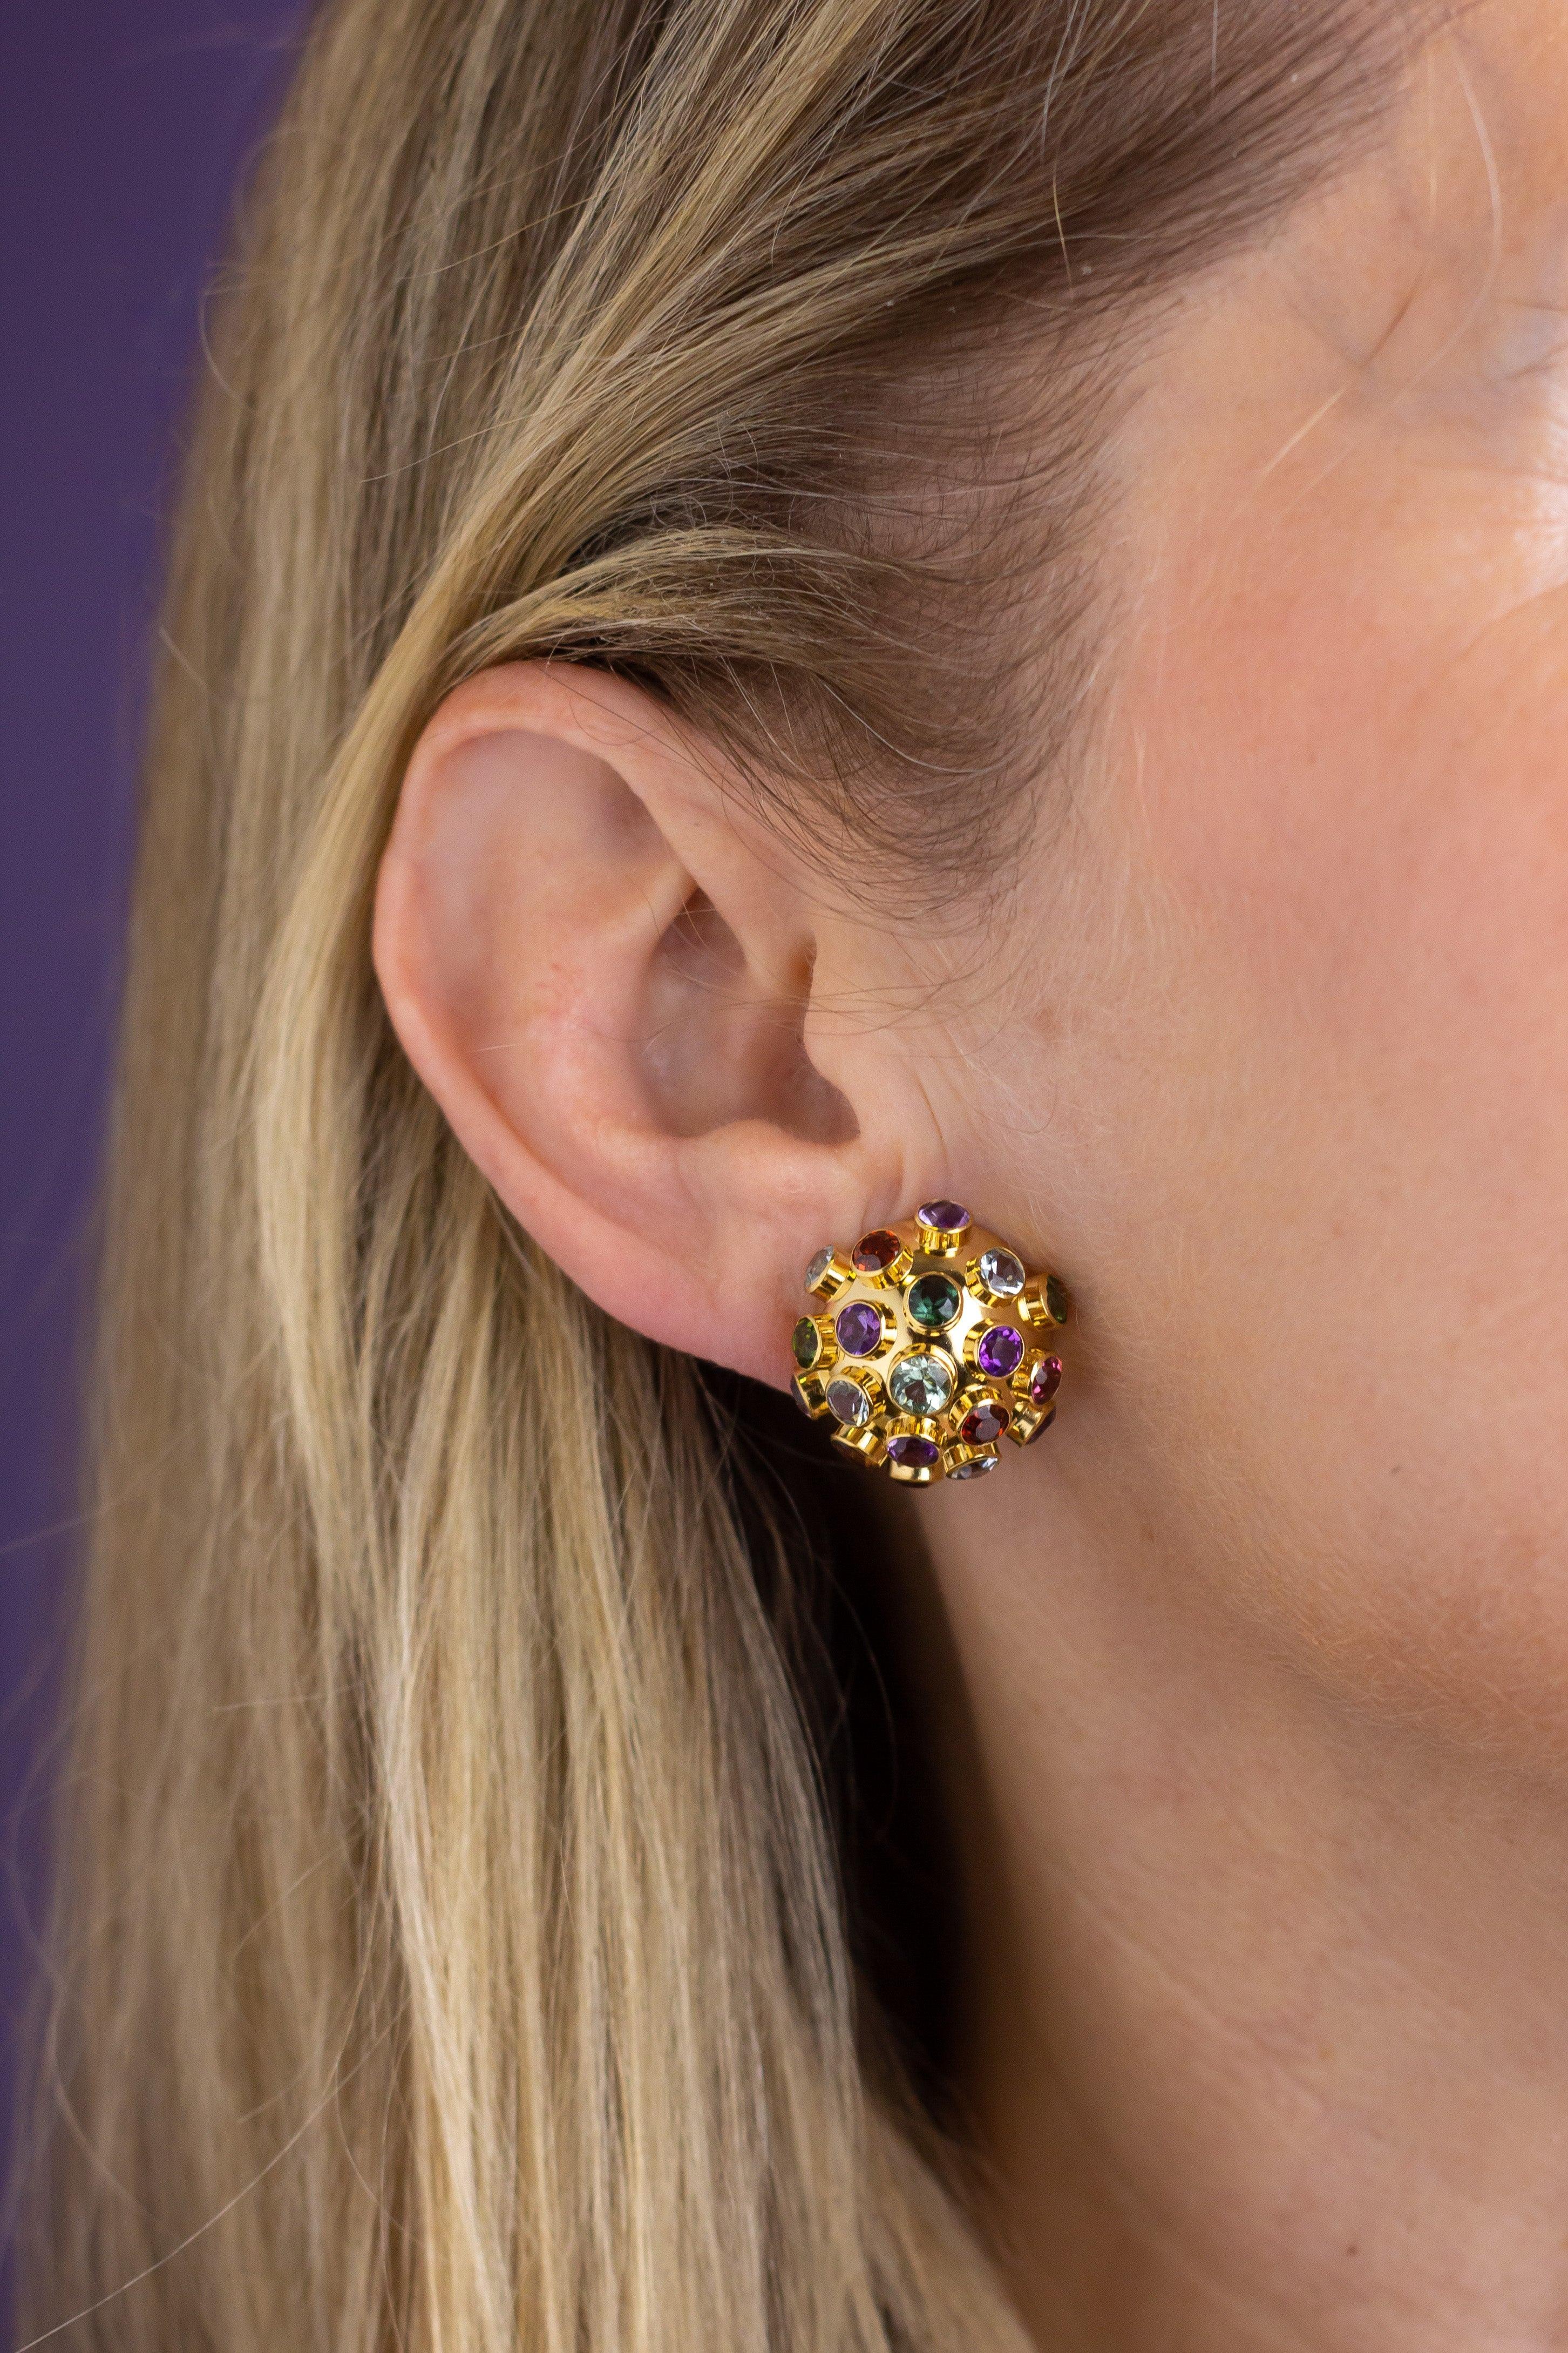 This pair of 18 karat yellow gold 'sputnik' ear clips were made by Brazilian designer H Stern during the mid 20th century. The domed 18 karat gold discs are rub-over set with an array of 38 semi precious stones including 12 amethysts, 10 topaz, 6